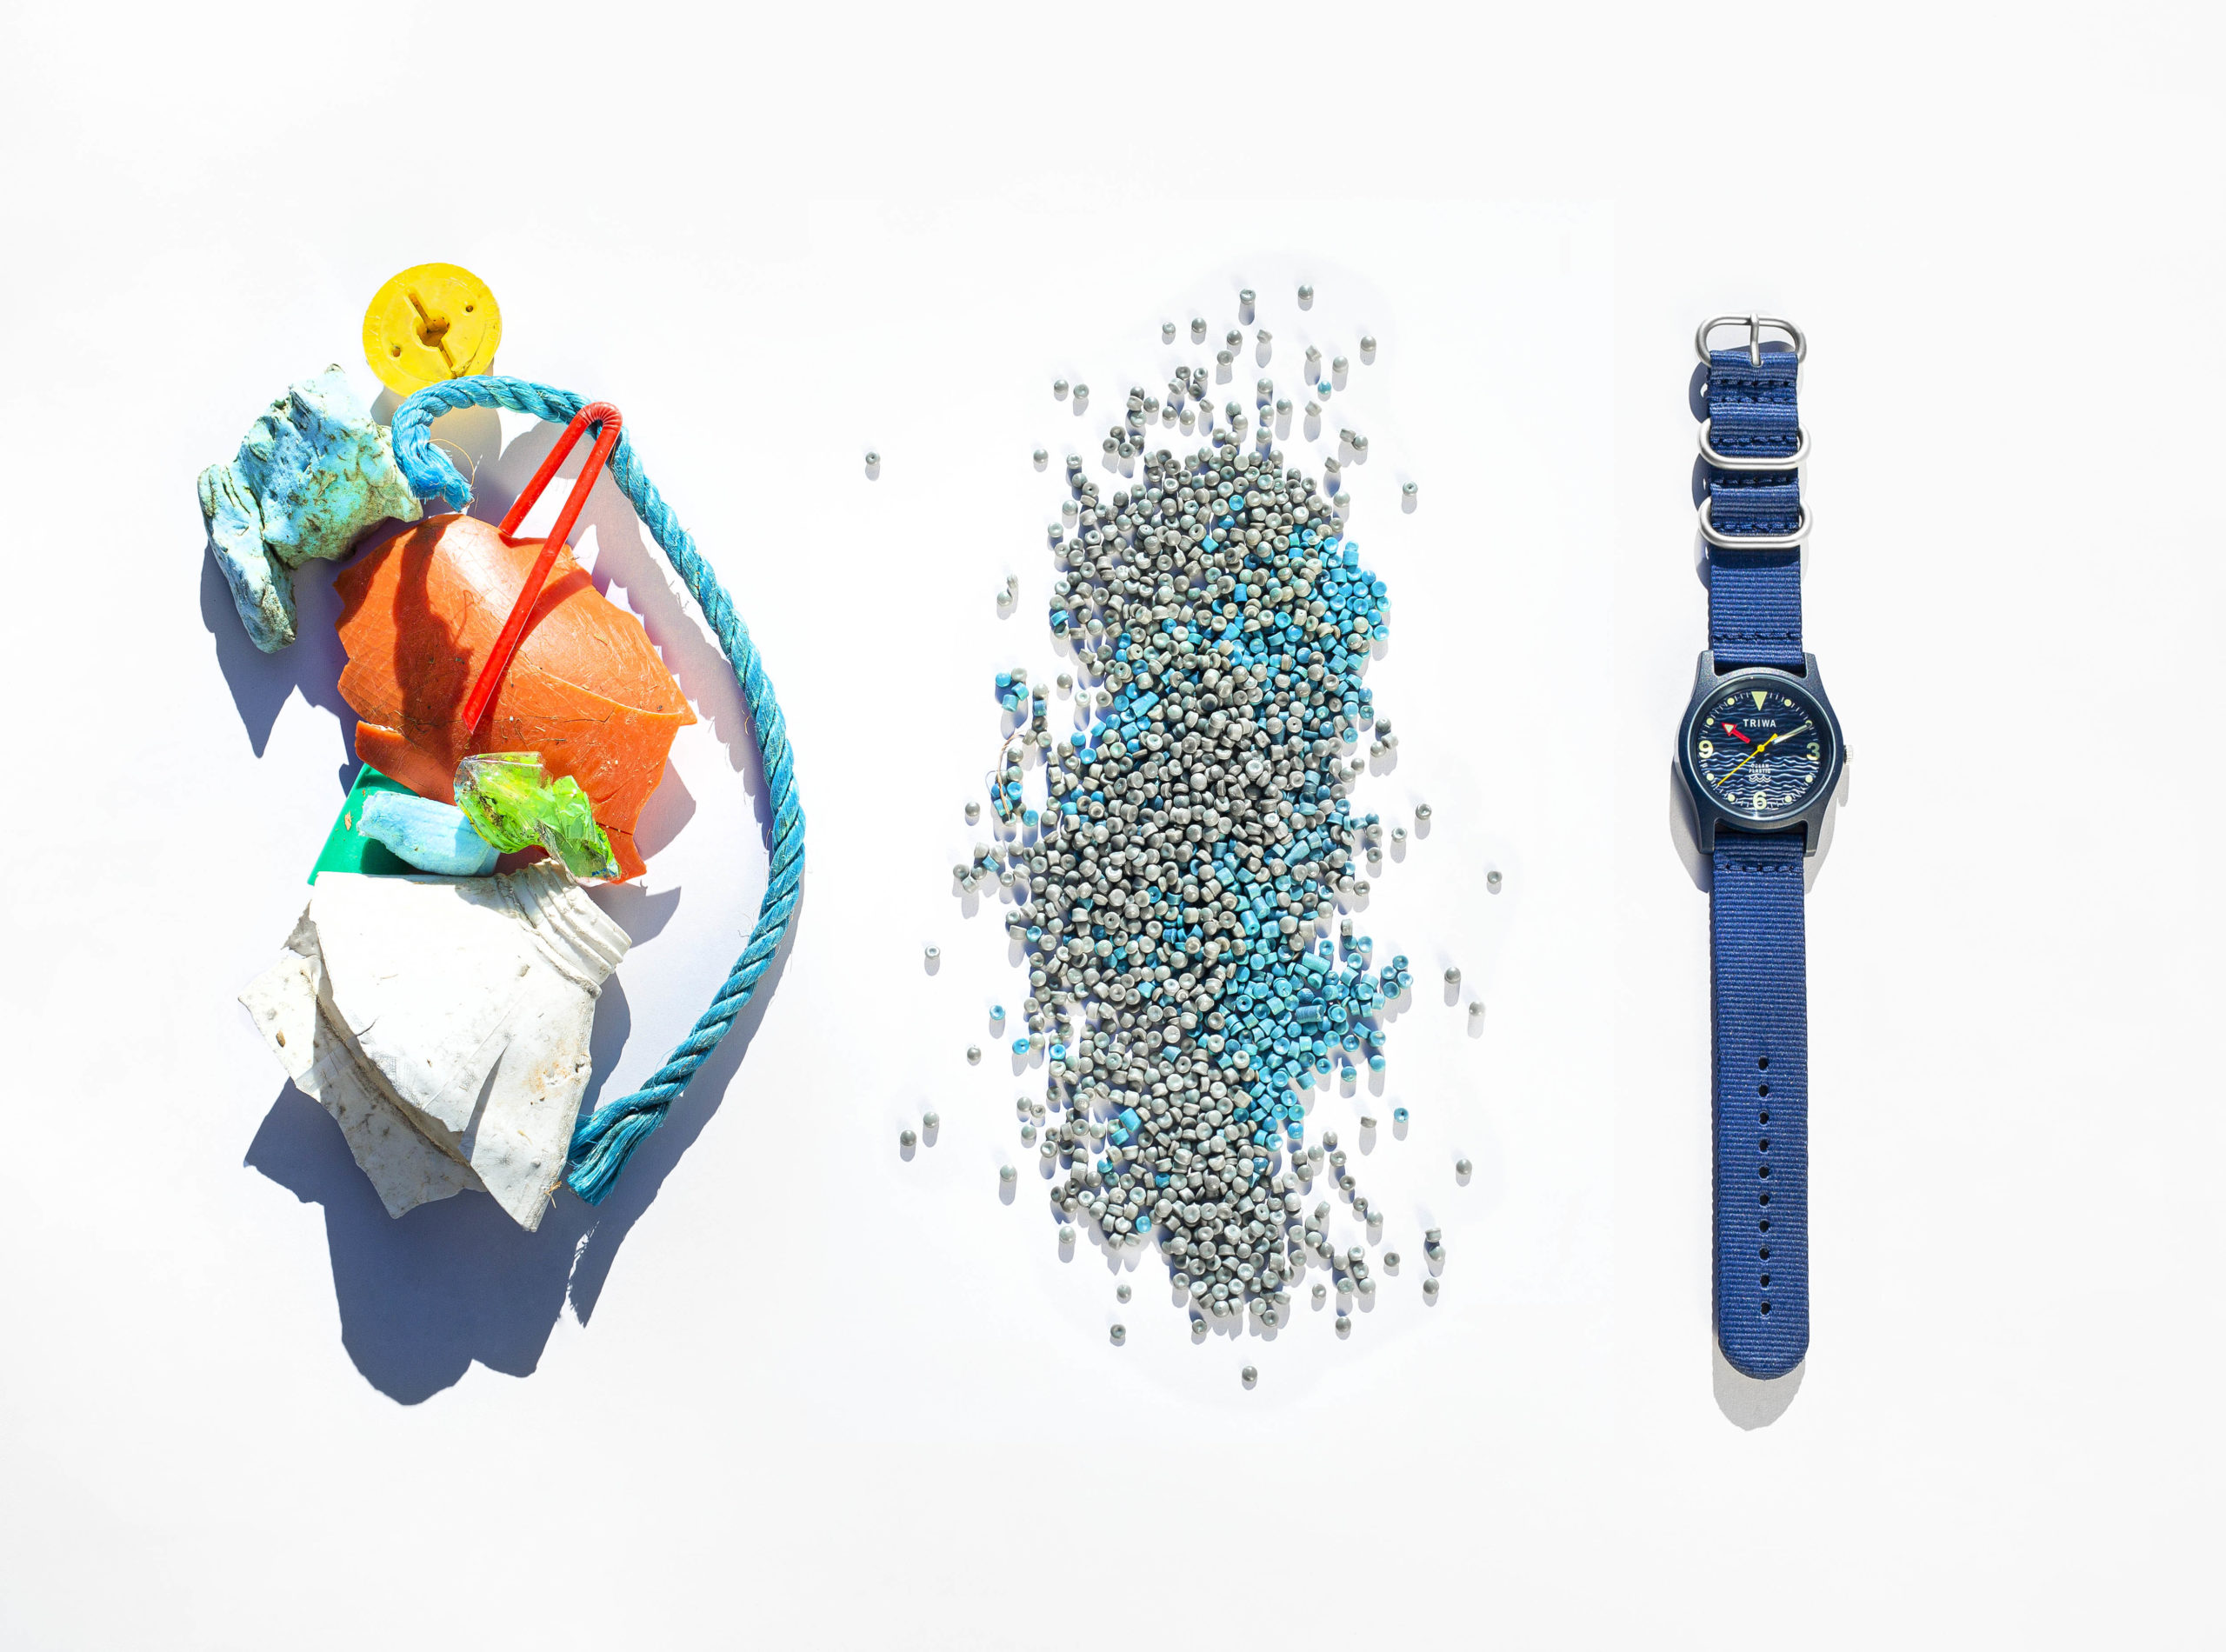 A watch made of ocean plastic - MaterialDistrict